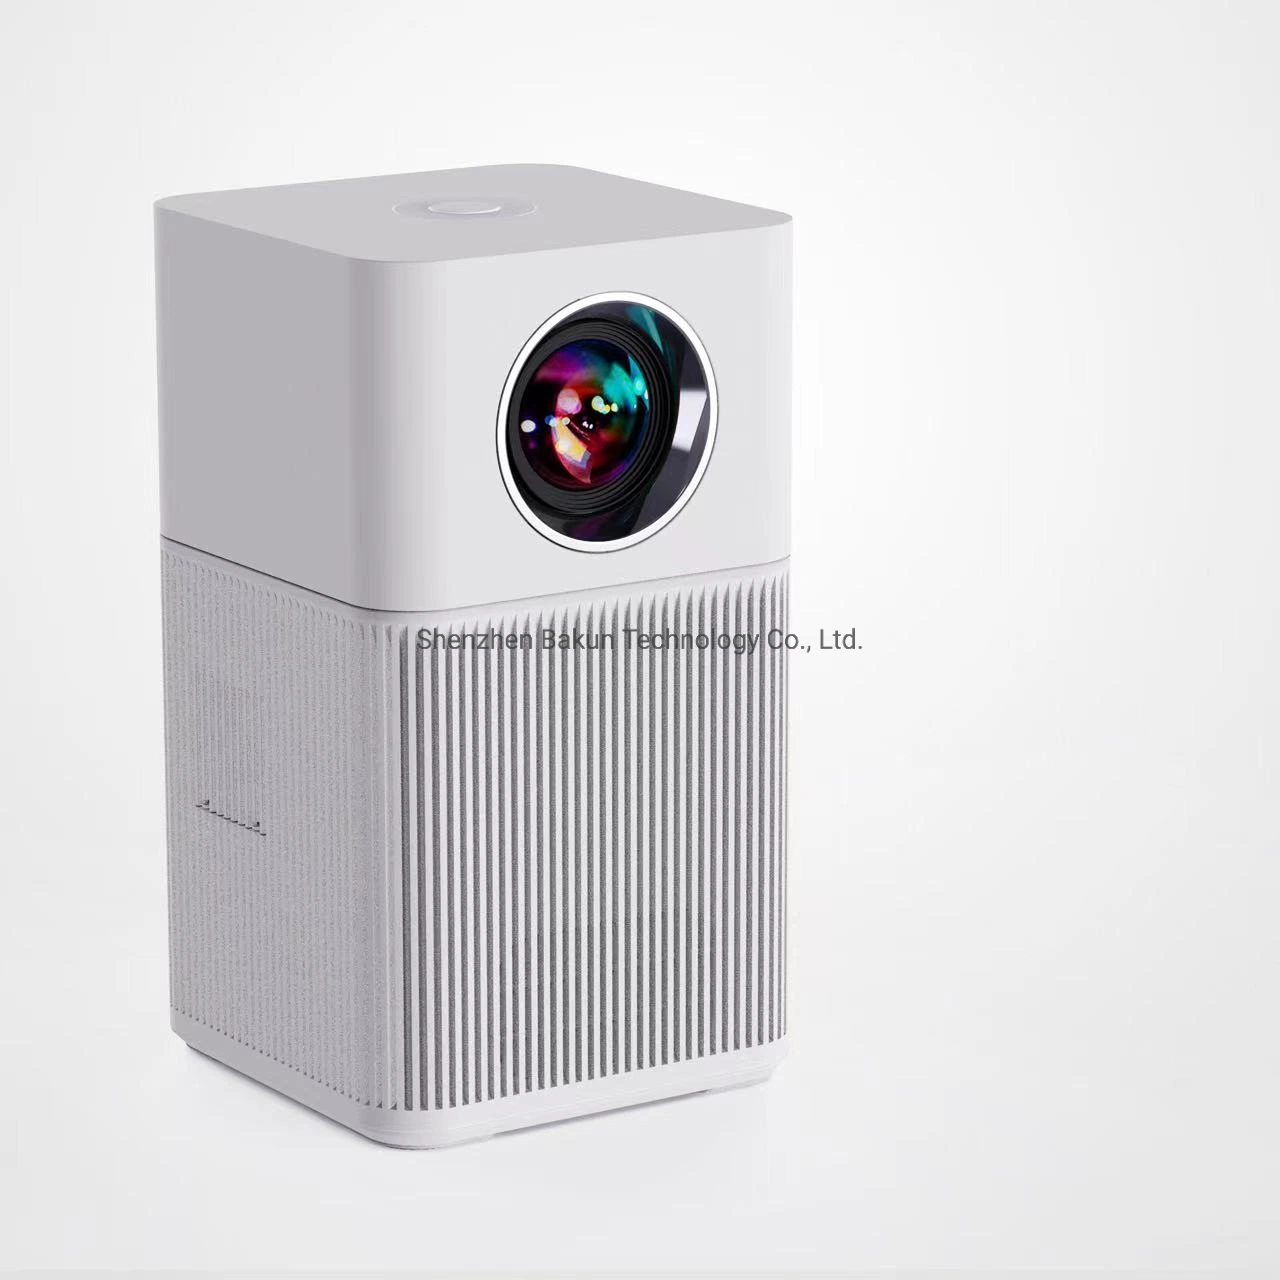 Home Theater LCD Projector 1080P Full HD Video Proyector Home Cinema Outdoor Big Screen Smart